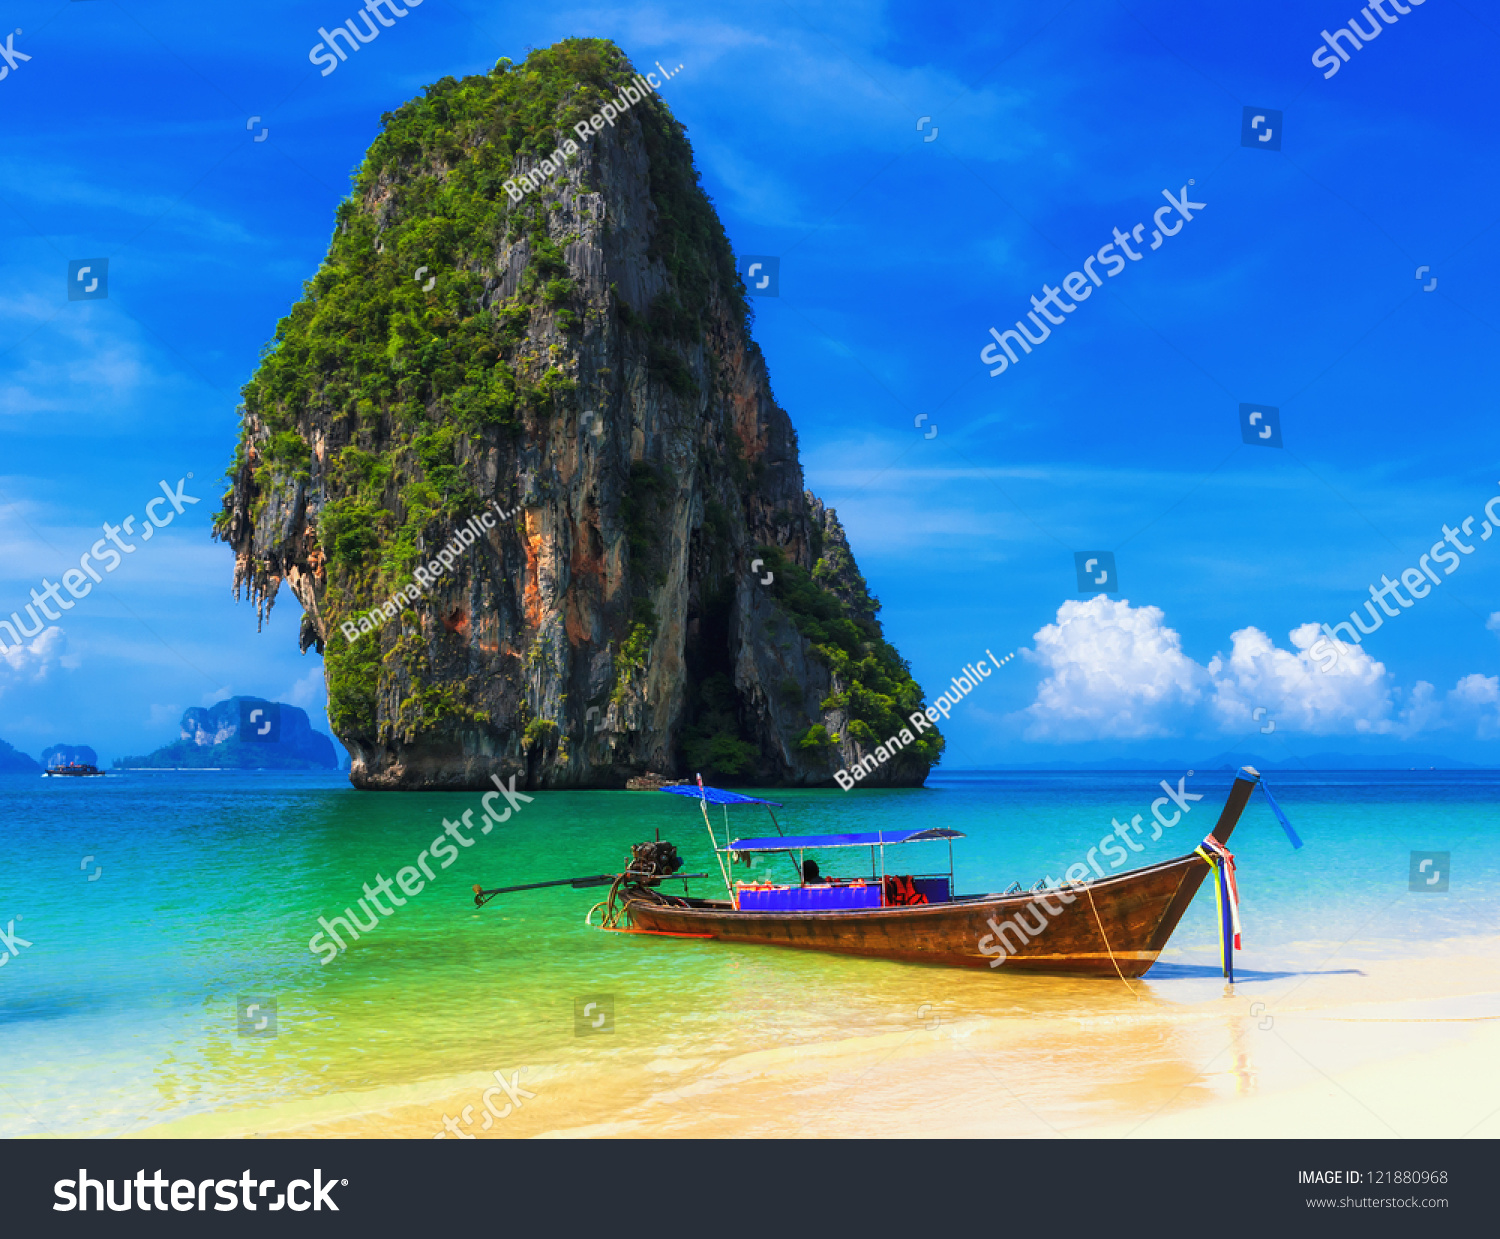 Should You Buy Travel Insurance Coverage Prior To a Journey? stock-photo-thailand-beach-exotic-island-tropical-paradise-for-asia-holiday-121880968